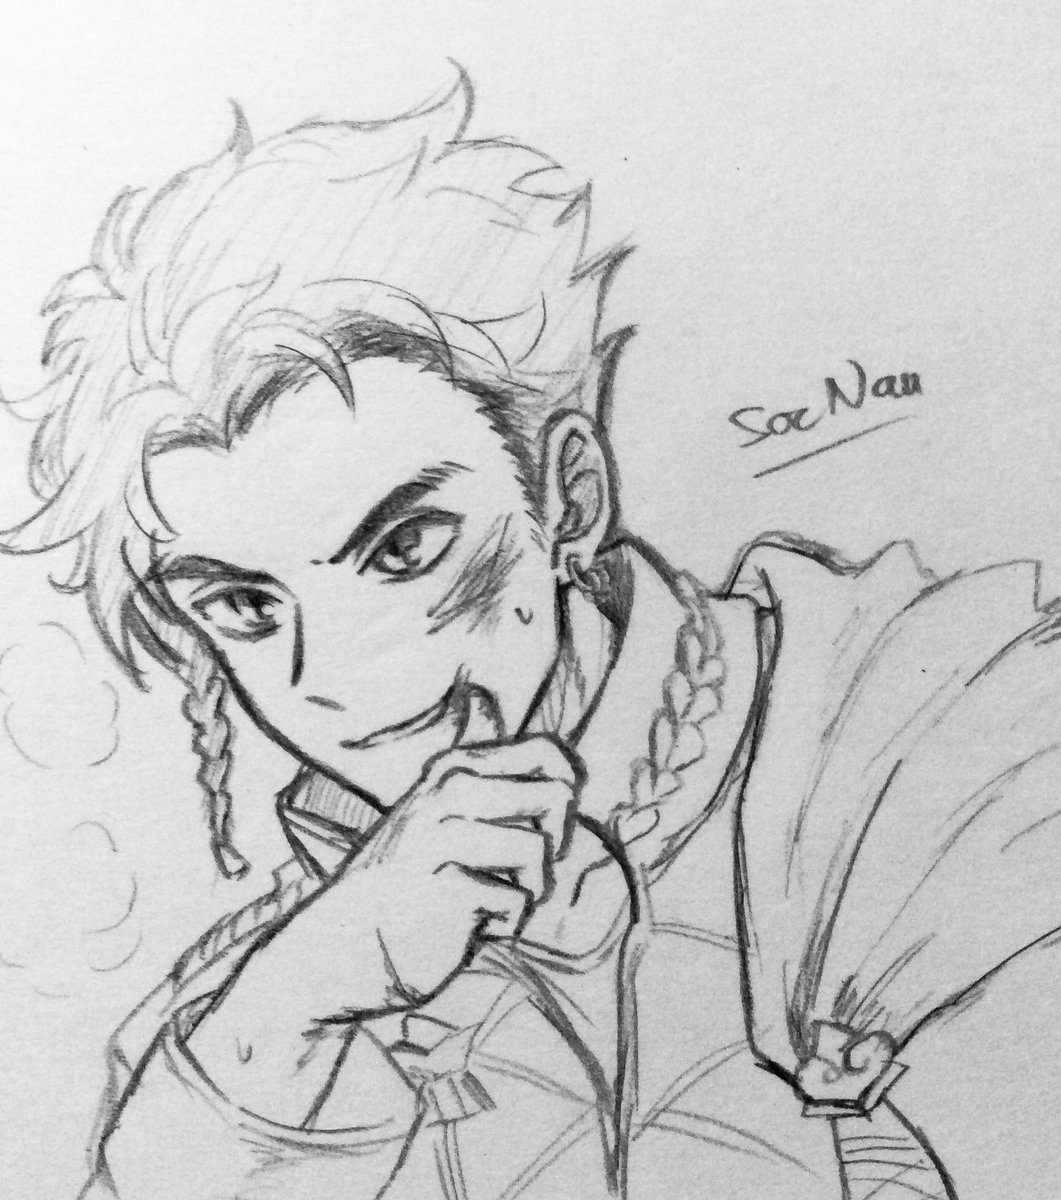 Claude doodles in both digital and traditional 💛💛
Because I miss him so much and it's so fun drawing him 🥺

#claudevonriegan #fe3h 